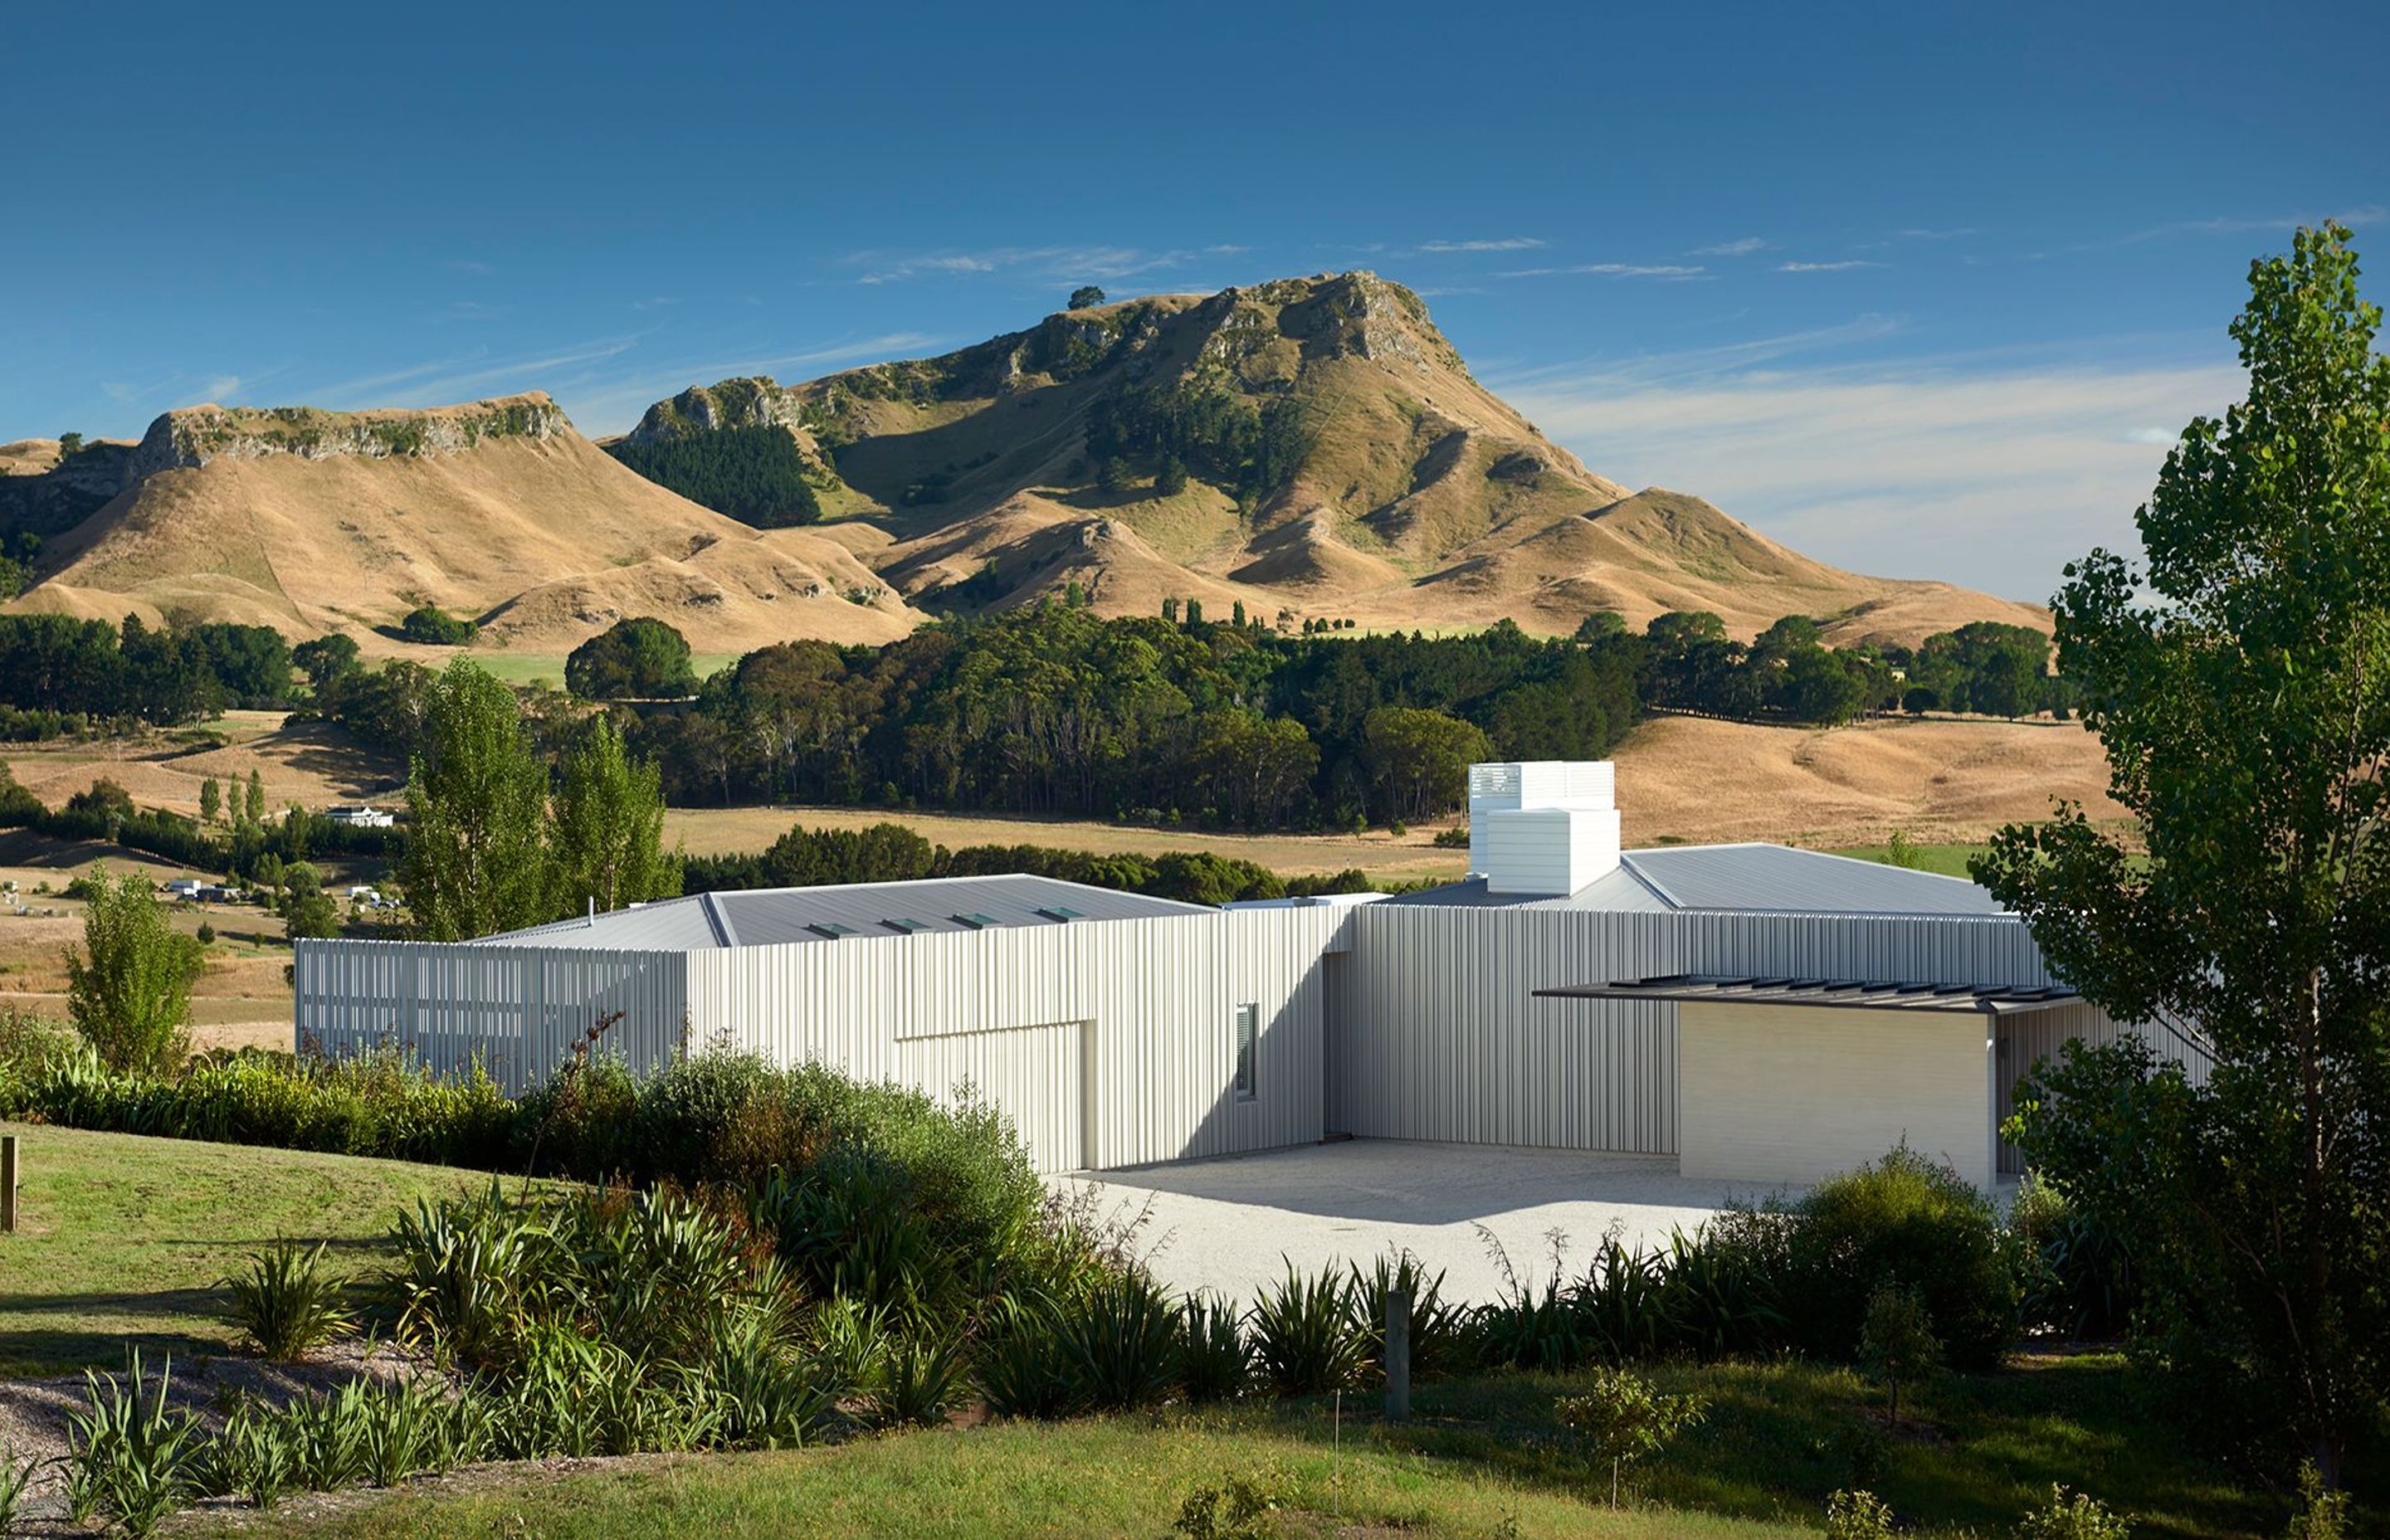 Hipped roofs peep up from the modern cladding, emulating the hilly topography of the surrounding landscaping with Te Mata Peak rising up in the distance.